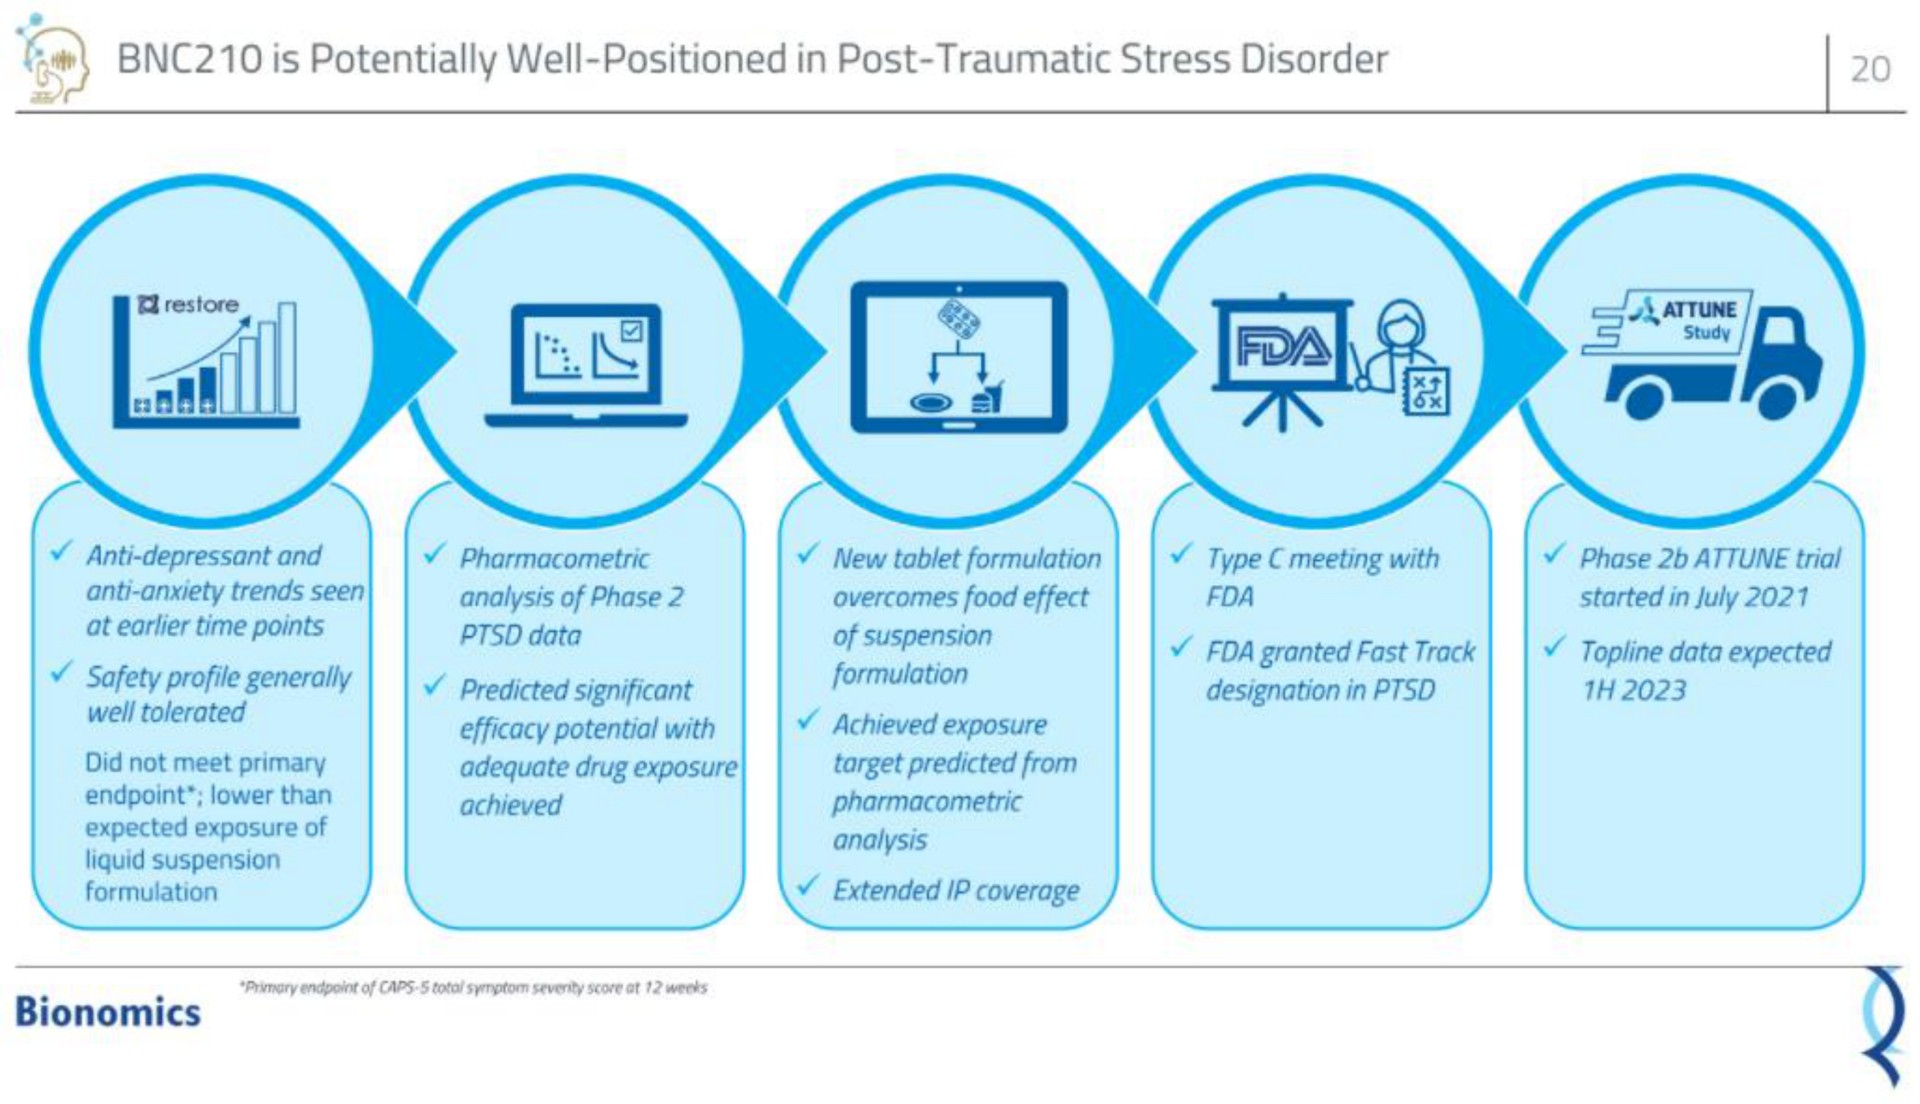 is potentially well positioned in post traumatic stress disorder | Bionomics